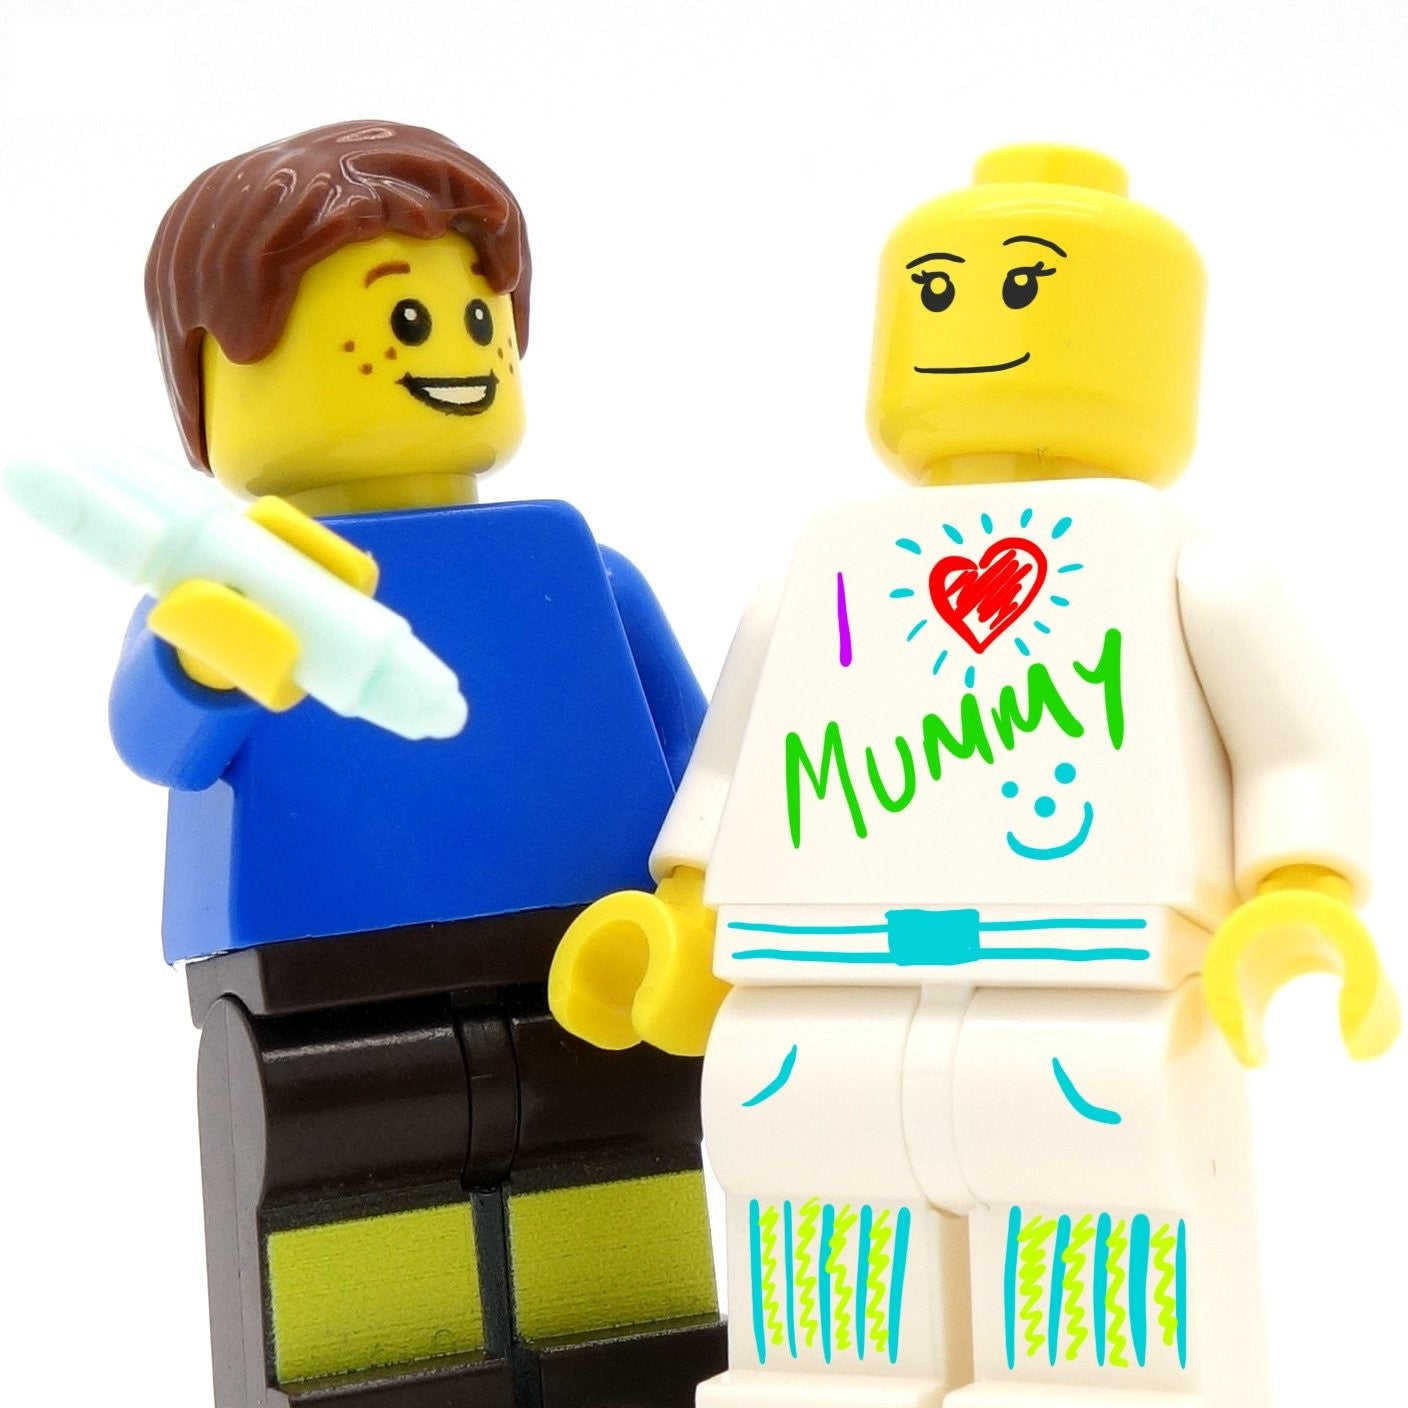 Minimalist Can You Design Your Own Lego Person with Dual Monitor